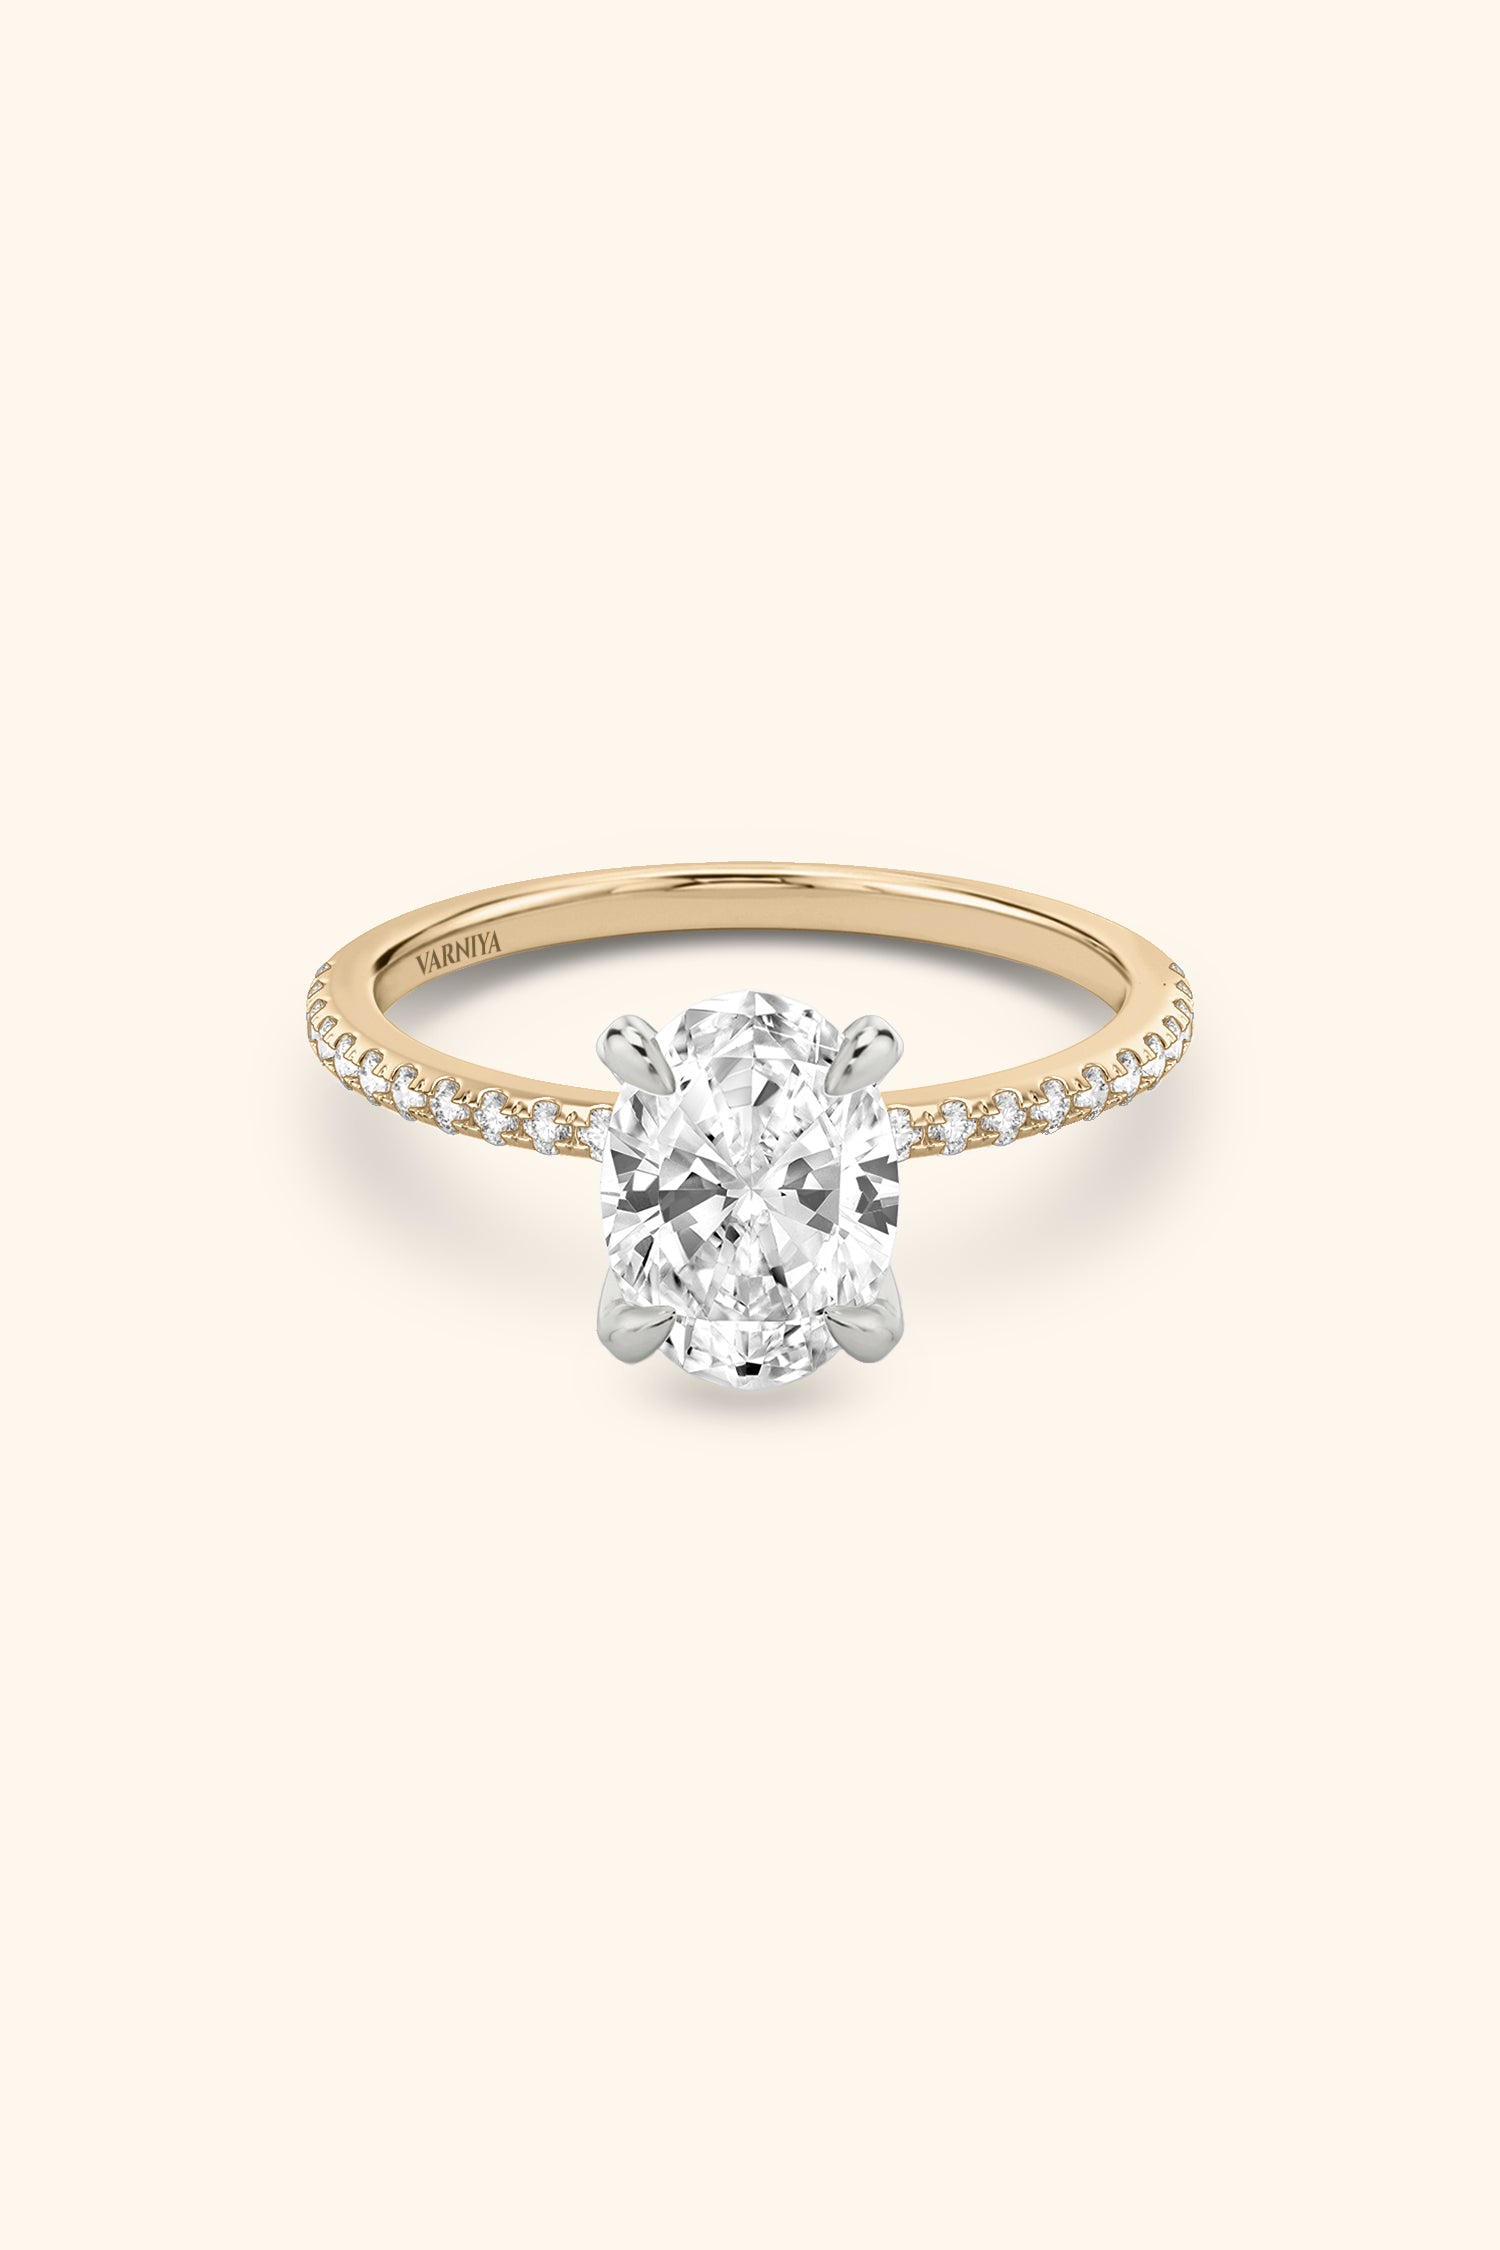 Dual Tone Glance Pavé Ring with 4 Carat Oval Solitaire